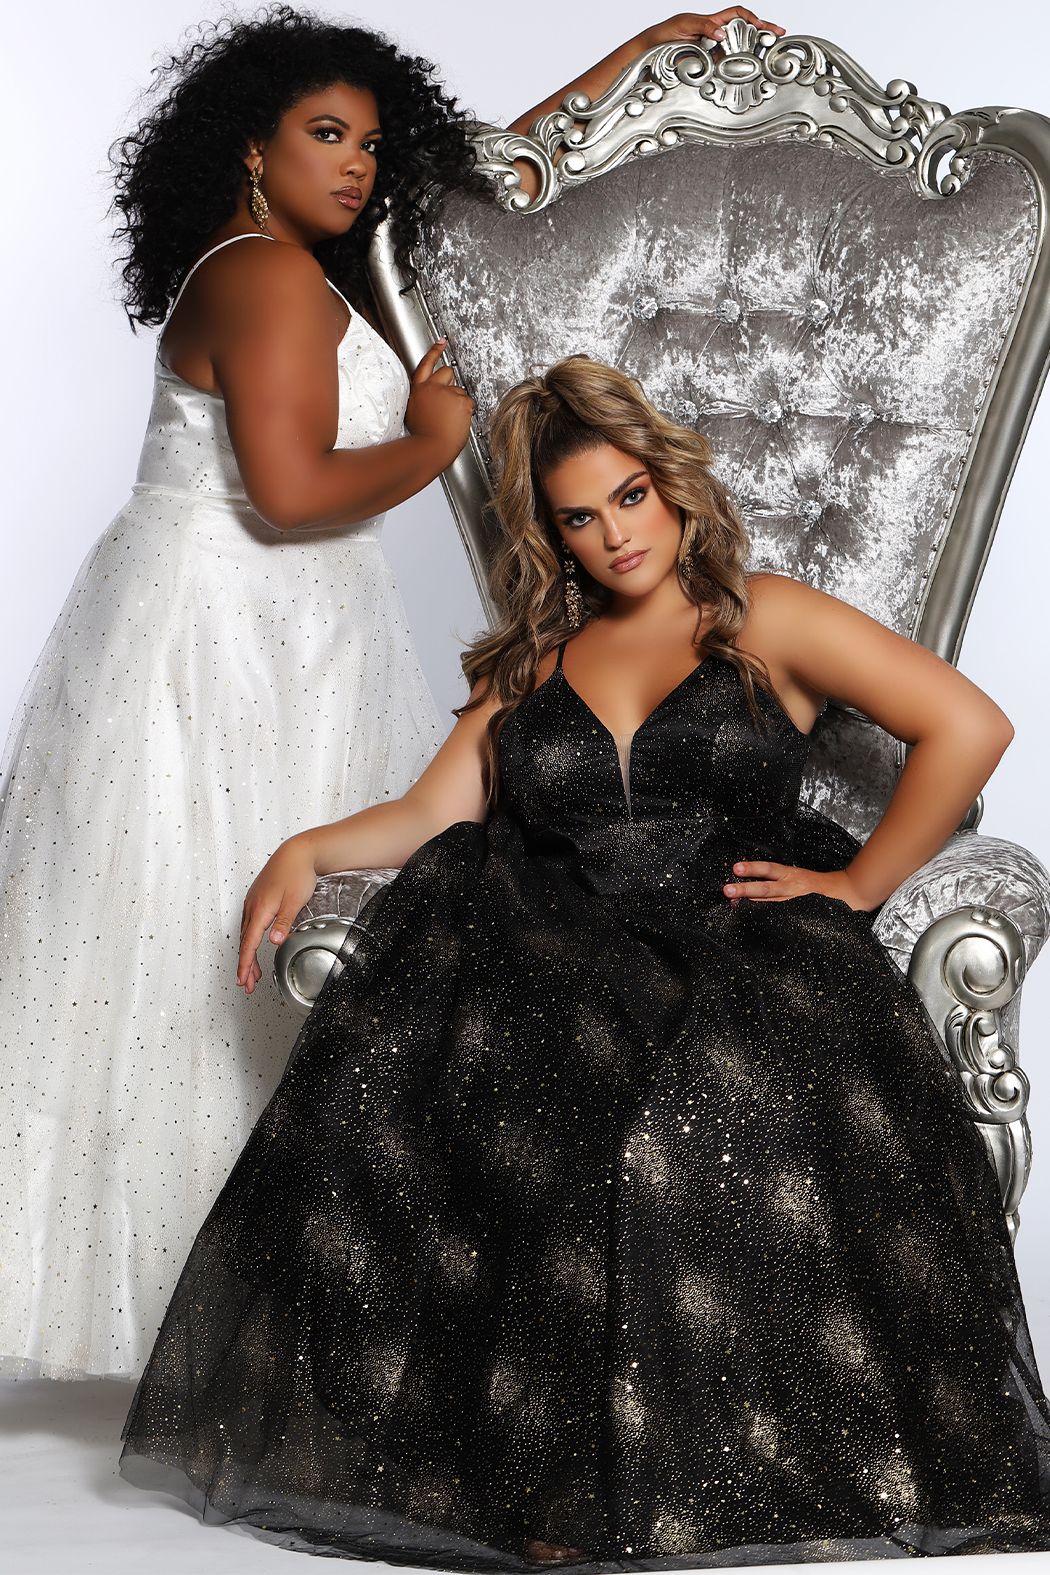 Sydney's Closet SC7327 Stunning in Black or Ivory, this prom dress has delicate details of adjustable spaghetti straps into the lace-up back with modesty panel offers the perfect amount of support. The bodice and full a line skirt shines under the lights with gold stars, moons, and glitter. Made even better with phone-friendly pockets. SC 7327